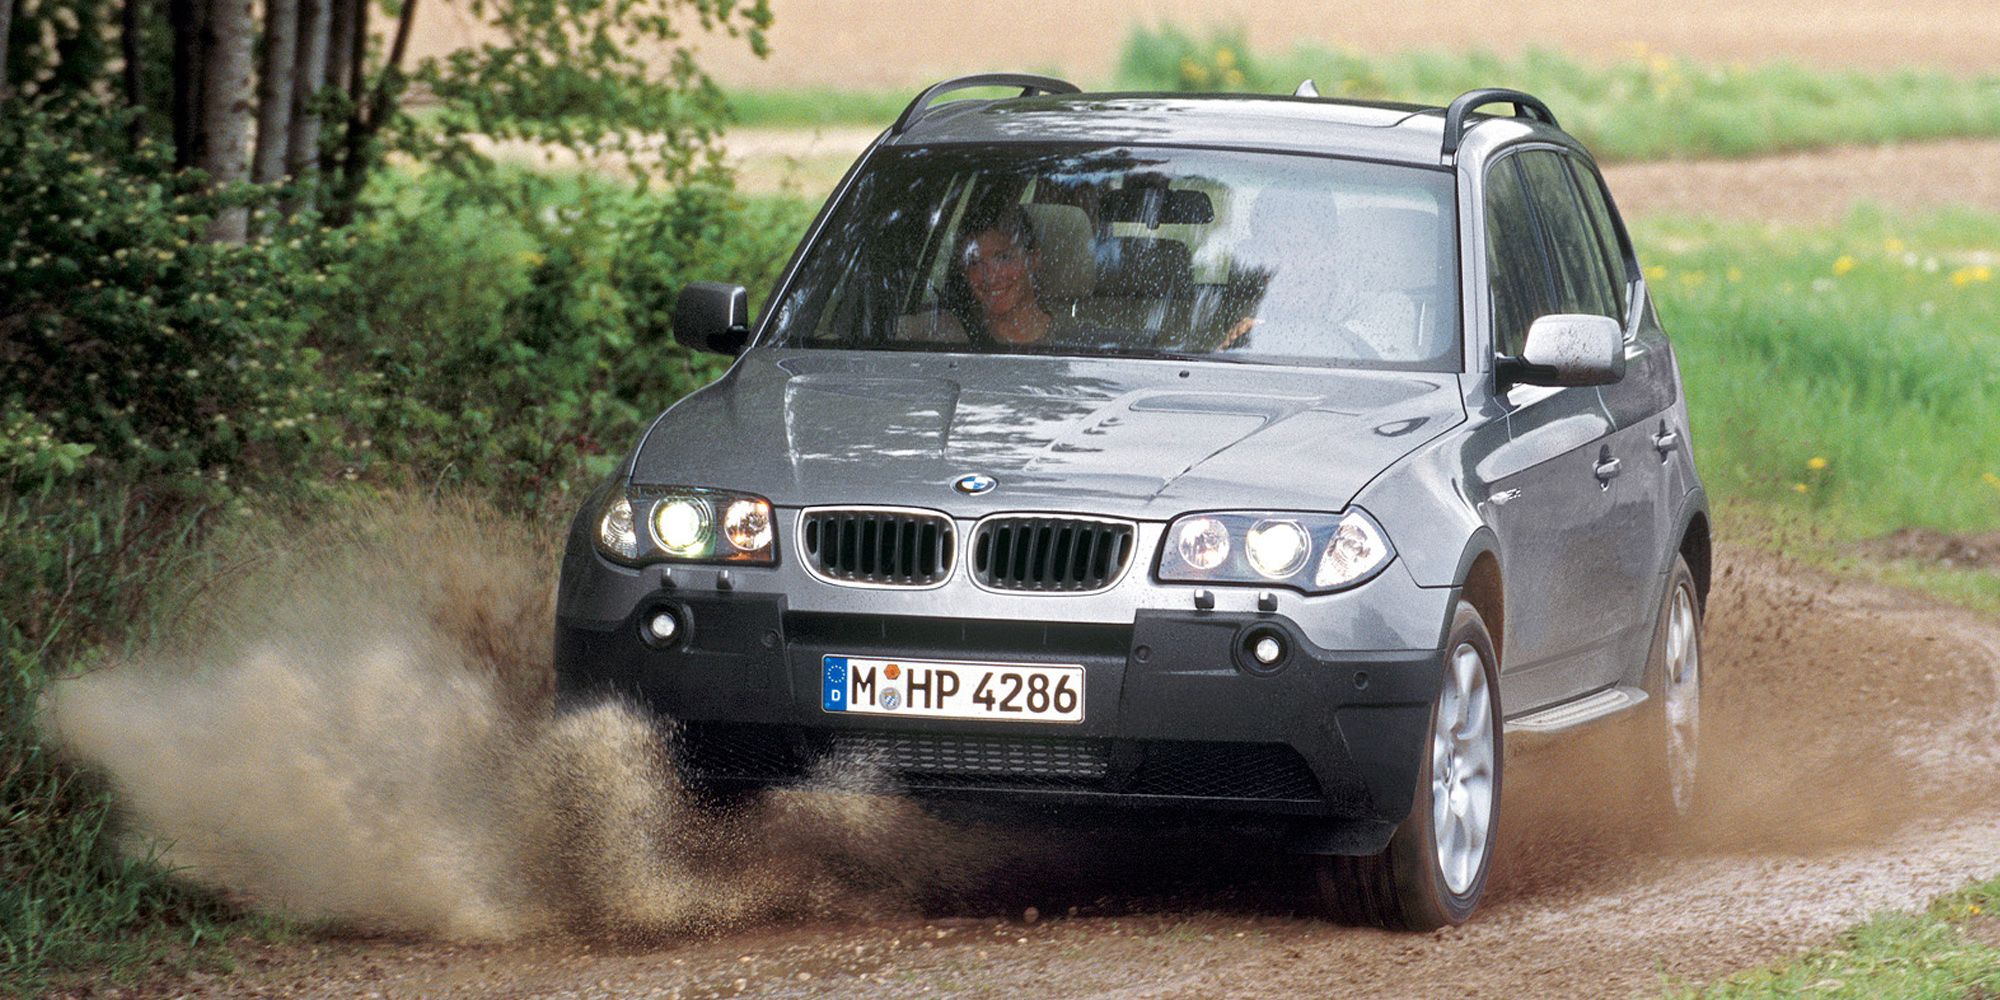 Front 3/4 view of a light gray E83 X3 attempting to off-road